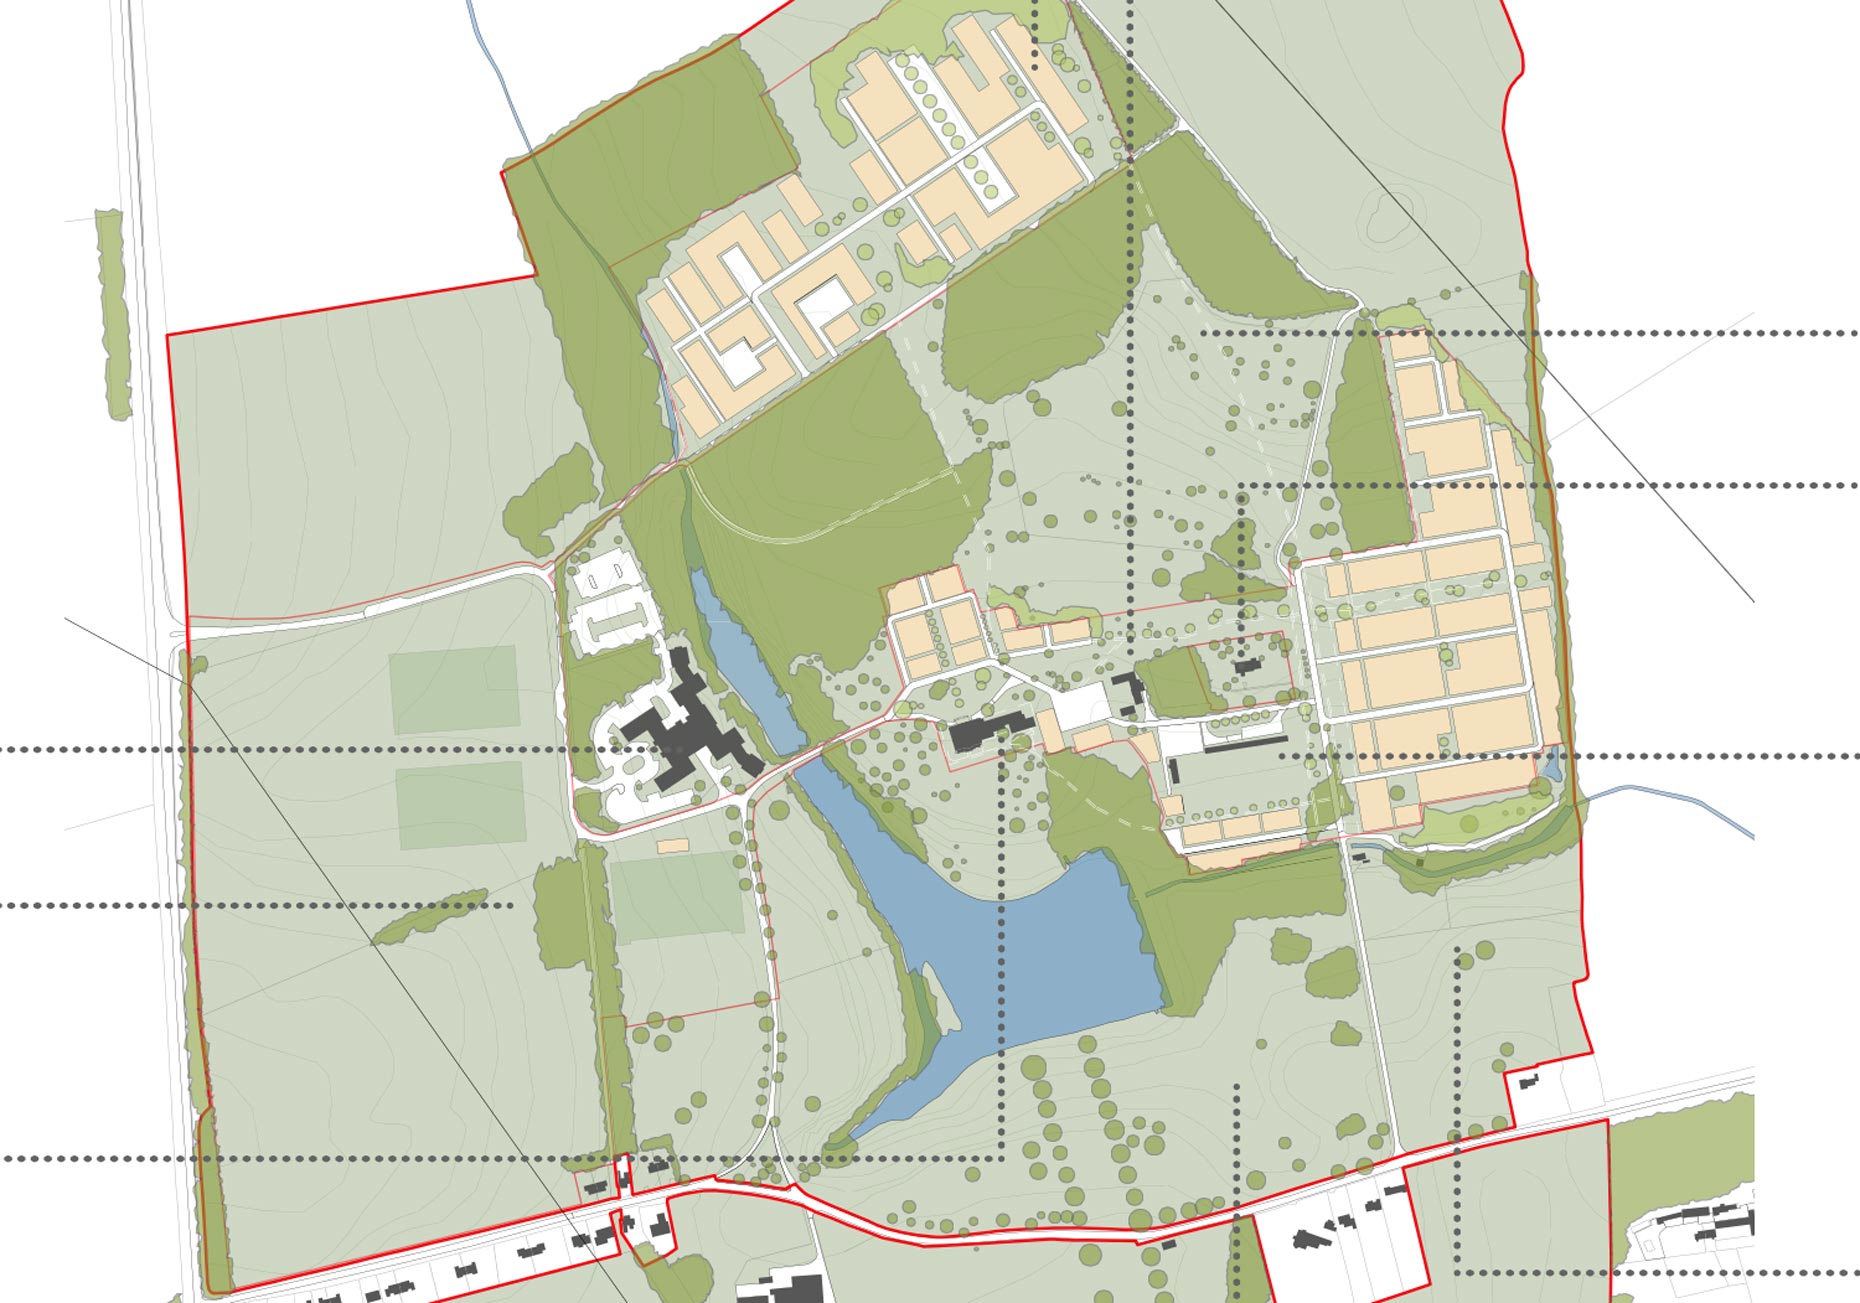 Overview of the proposed masterplan for the development. 